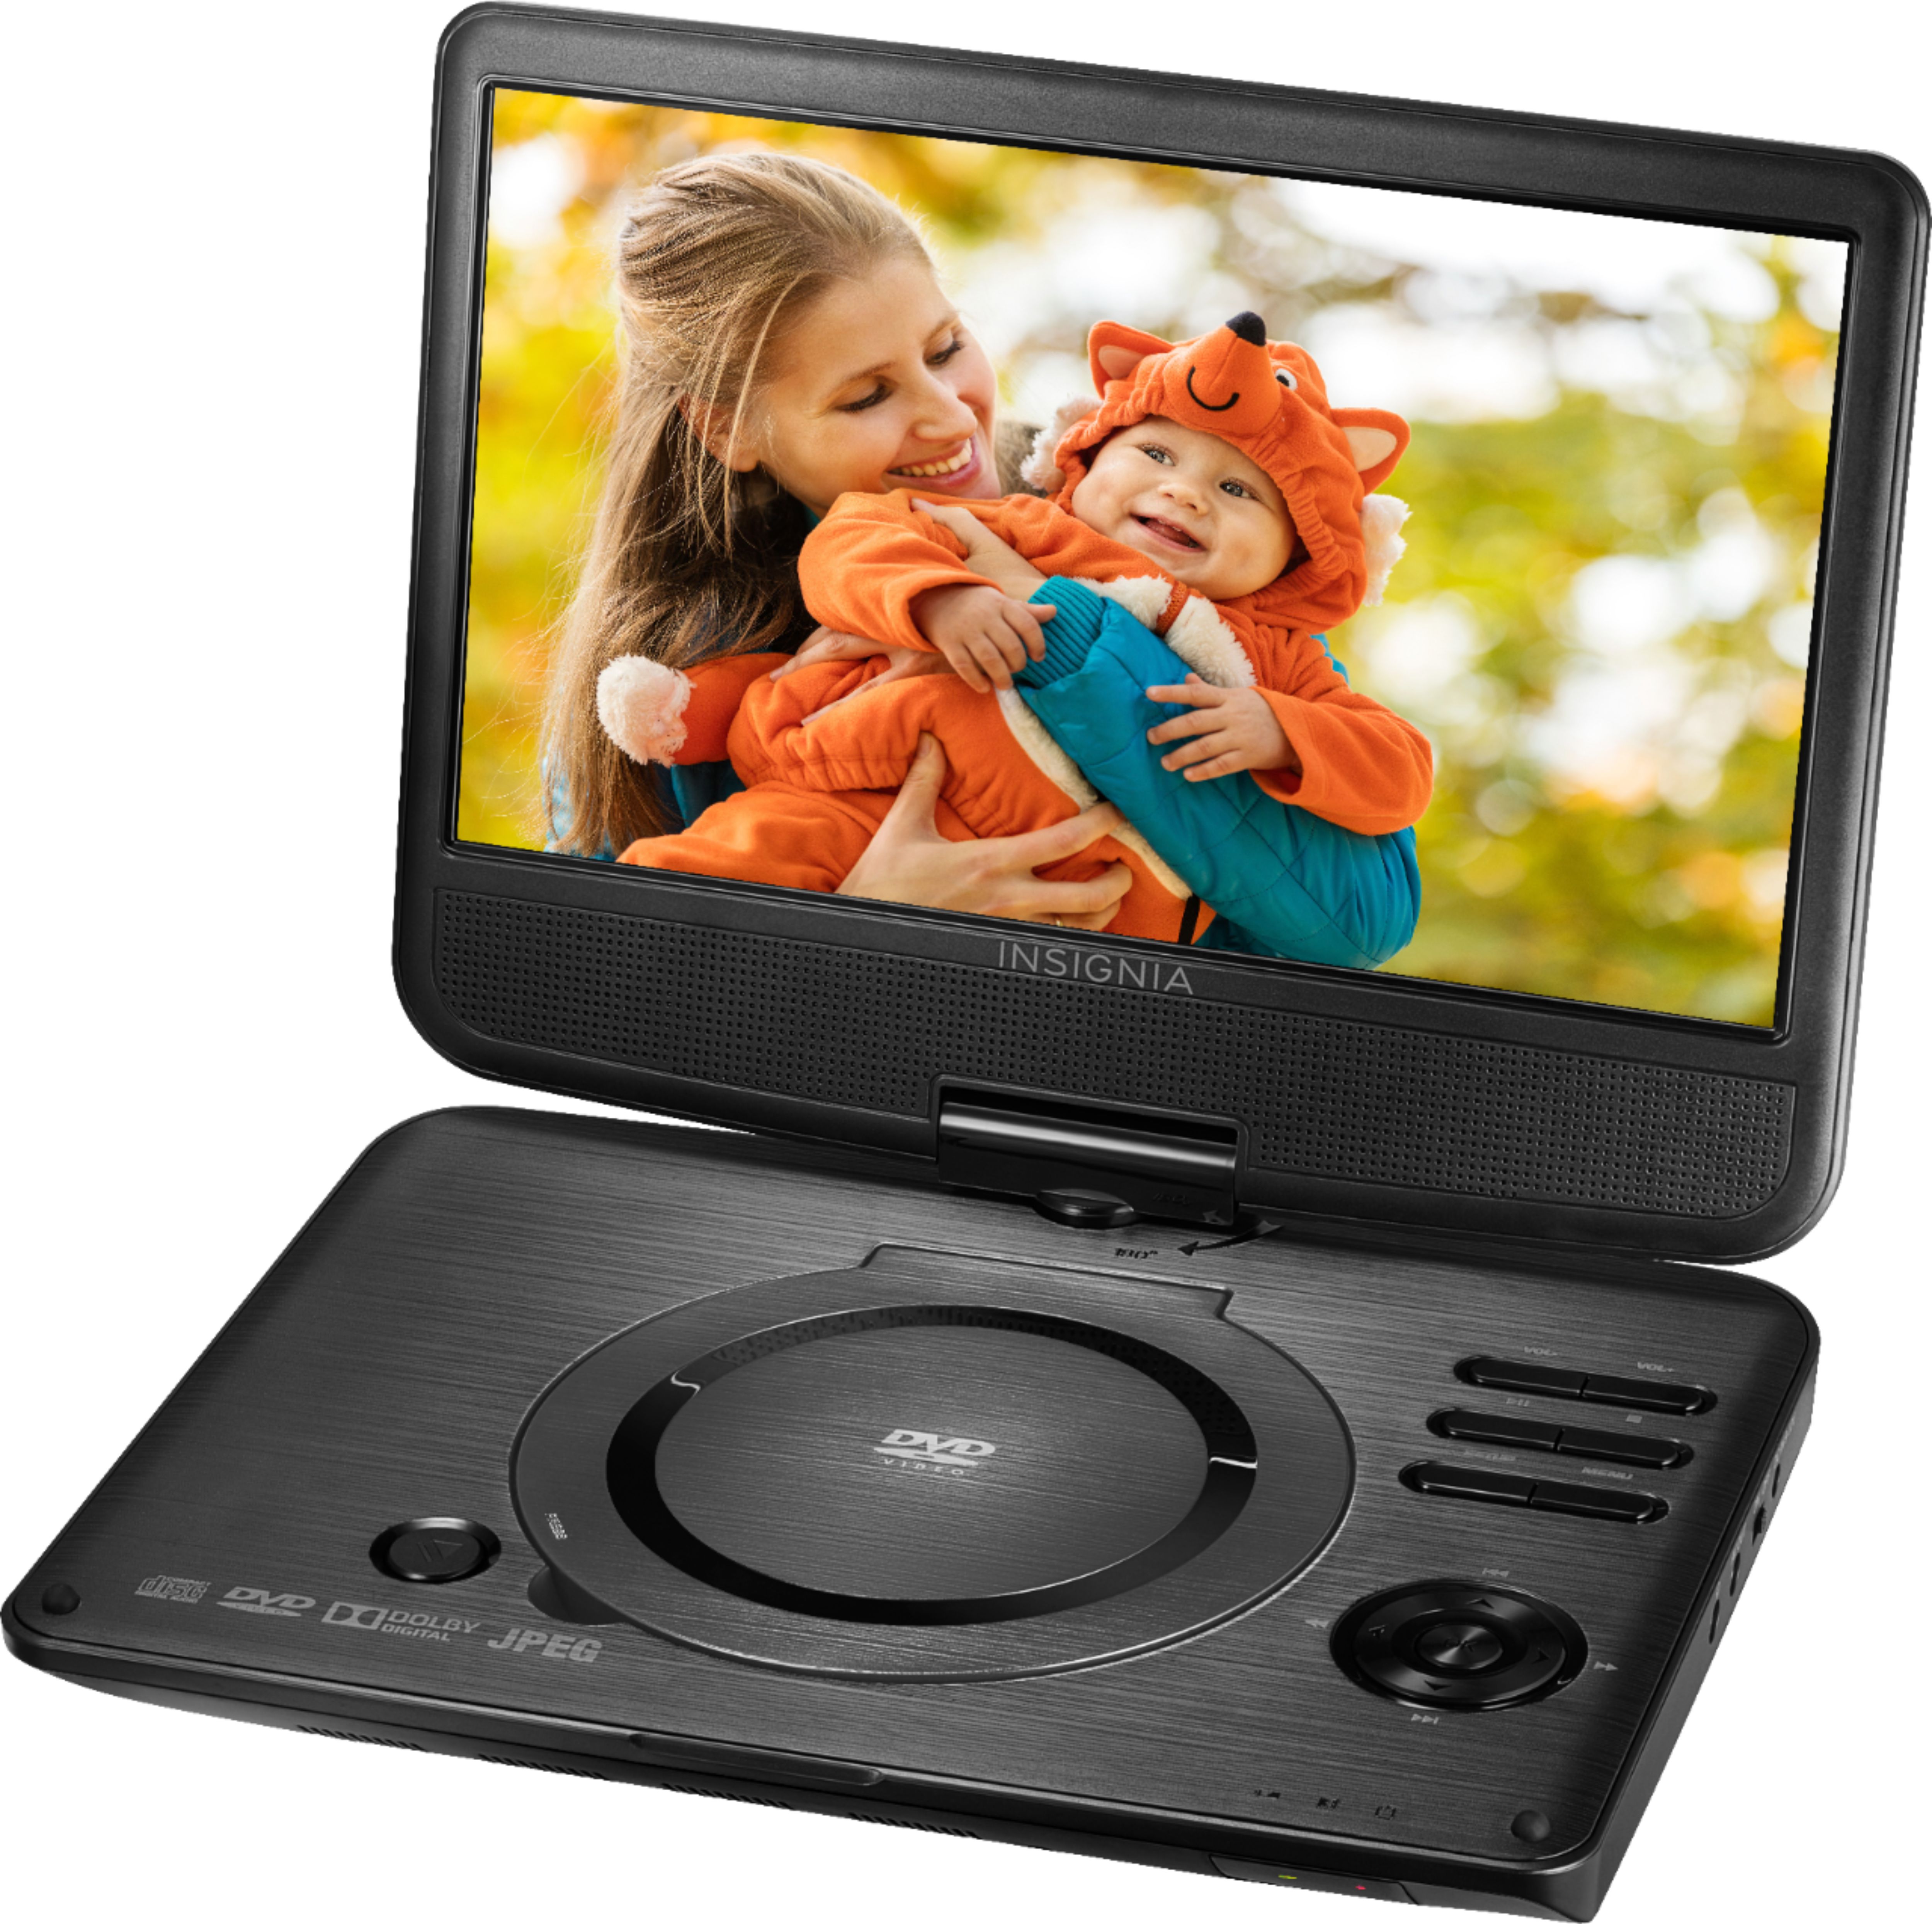 rok Wild Auto Insignia™ 10" Portable DVD Player with Swivel Screen Black NS-P10DVD20 -  Best Buy